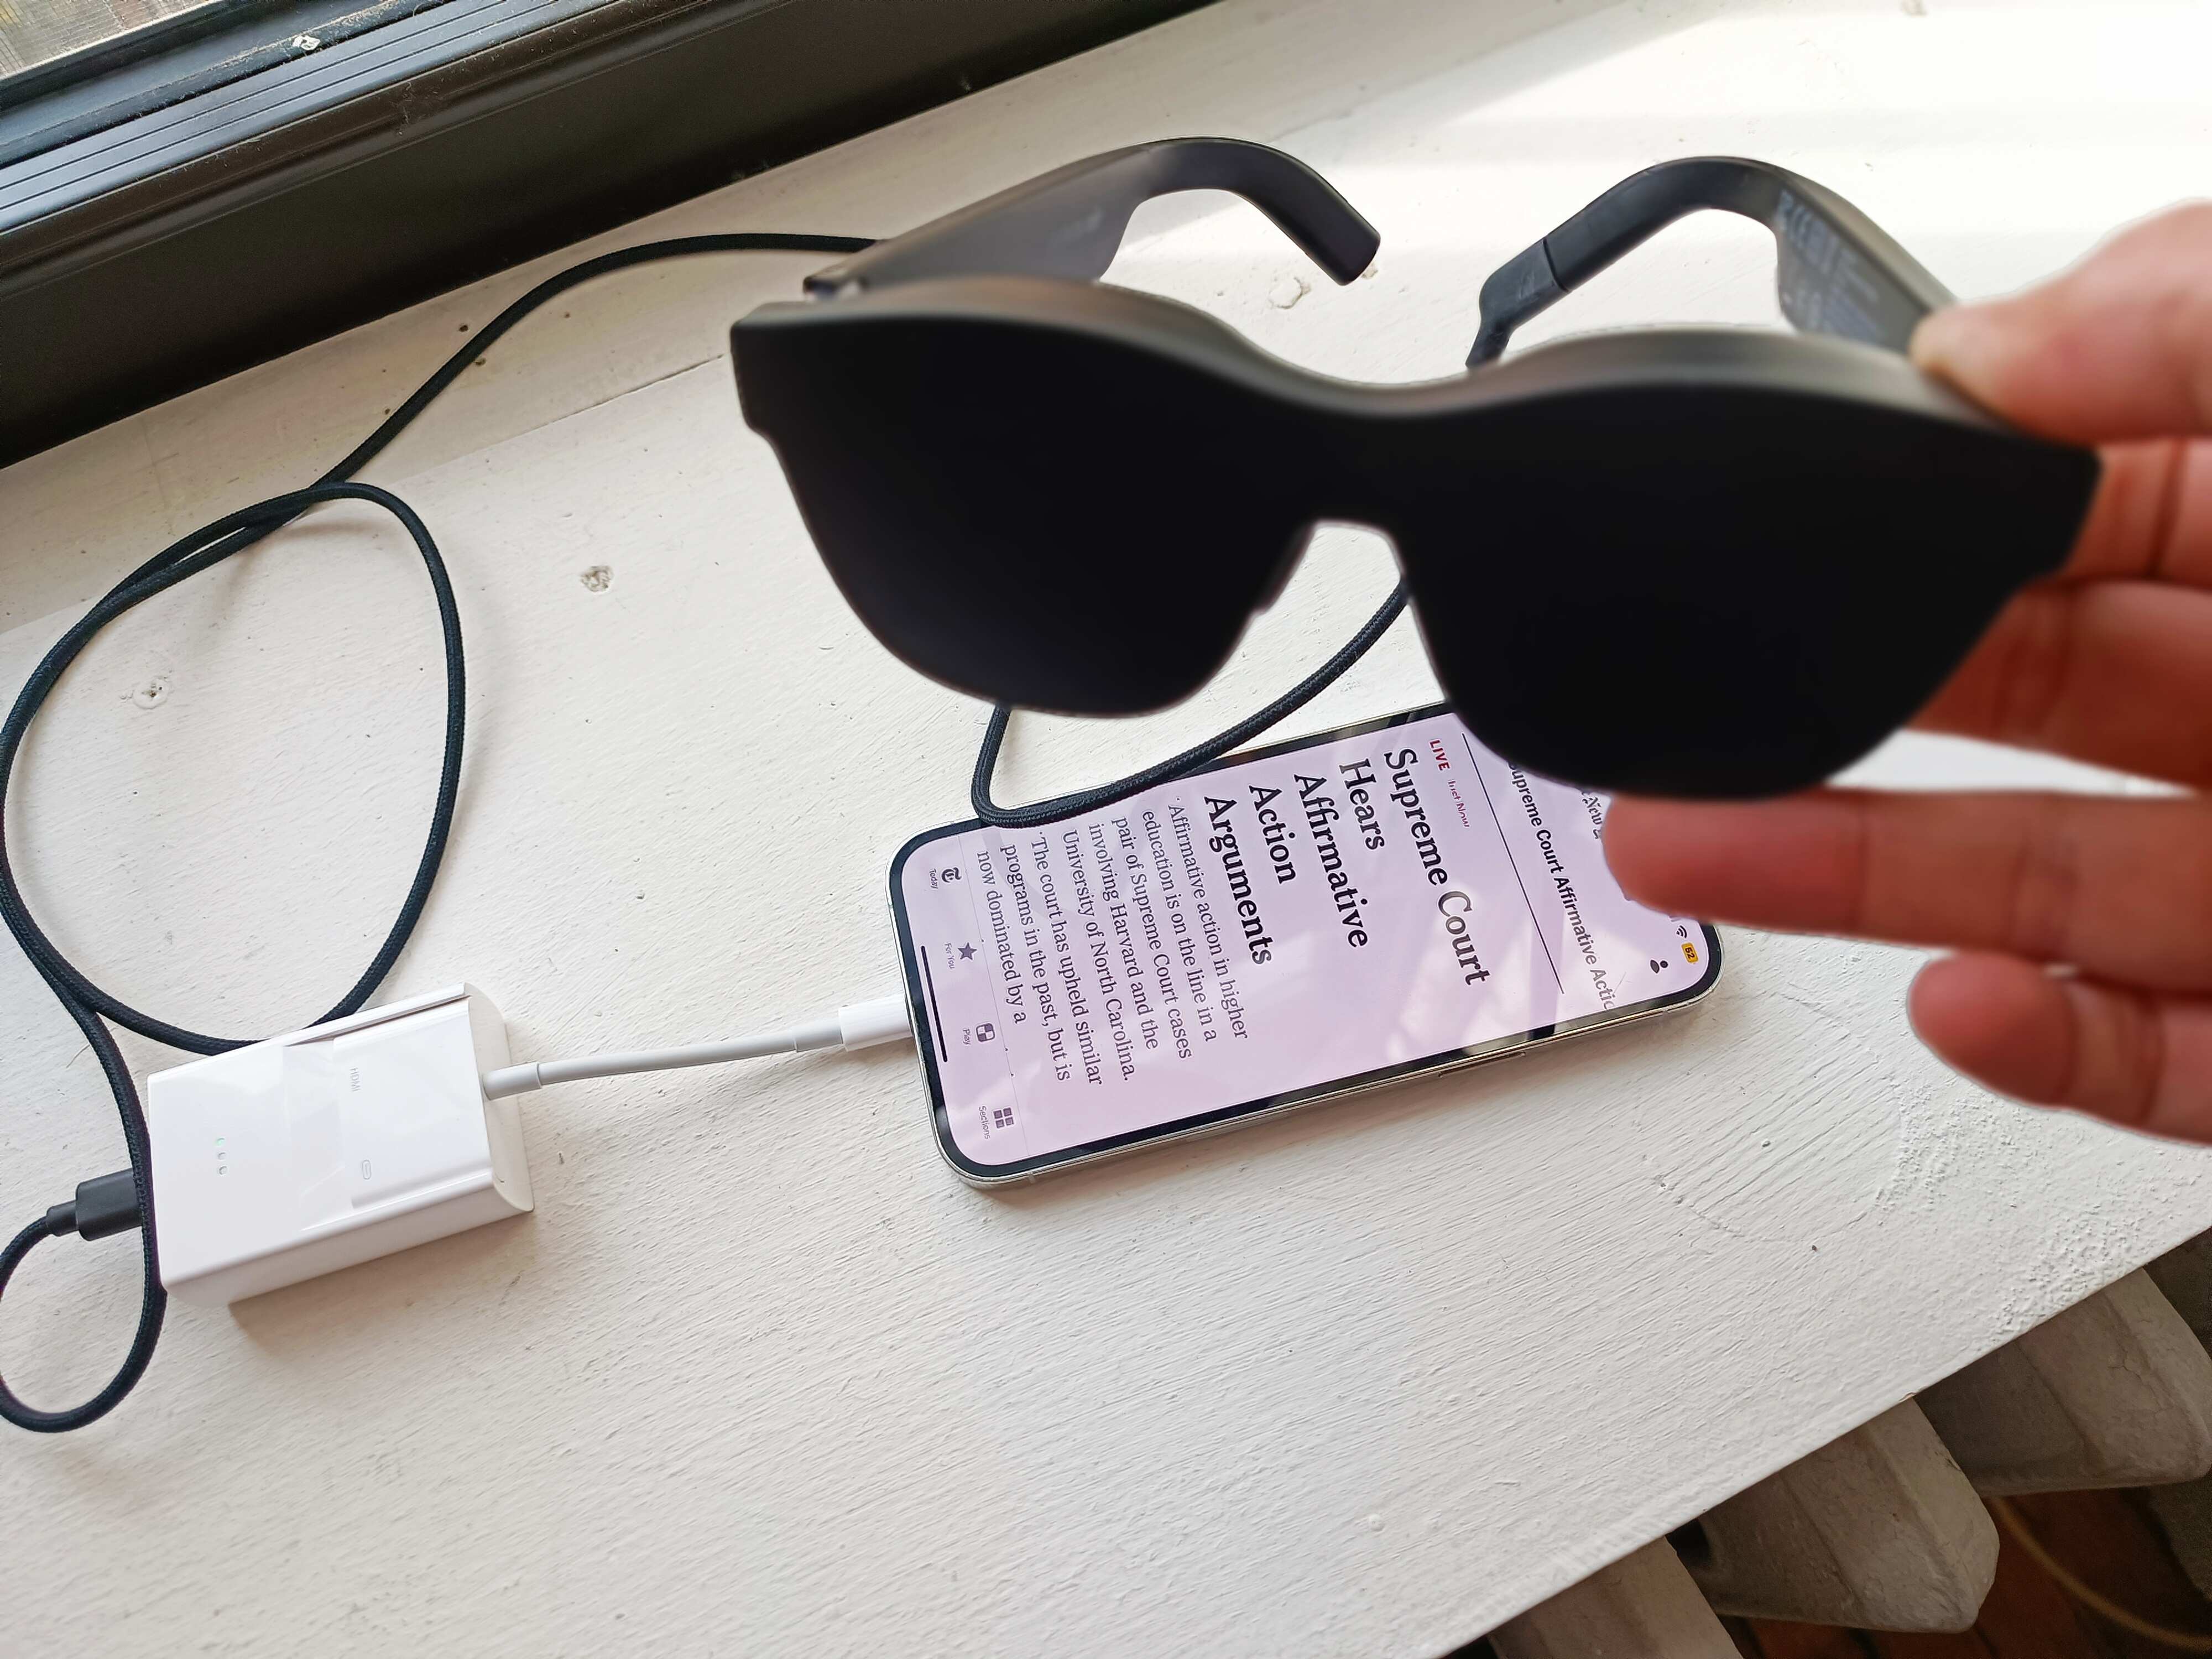 How the Nreal Air AR glasses totally transformed my iPhone